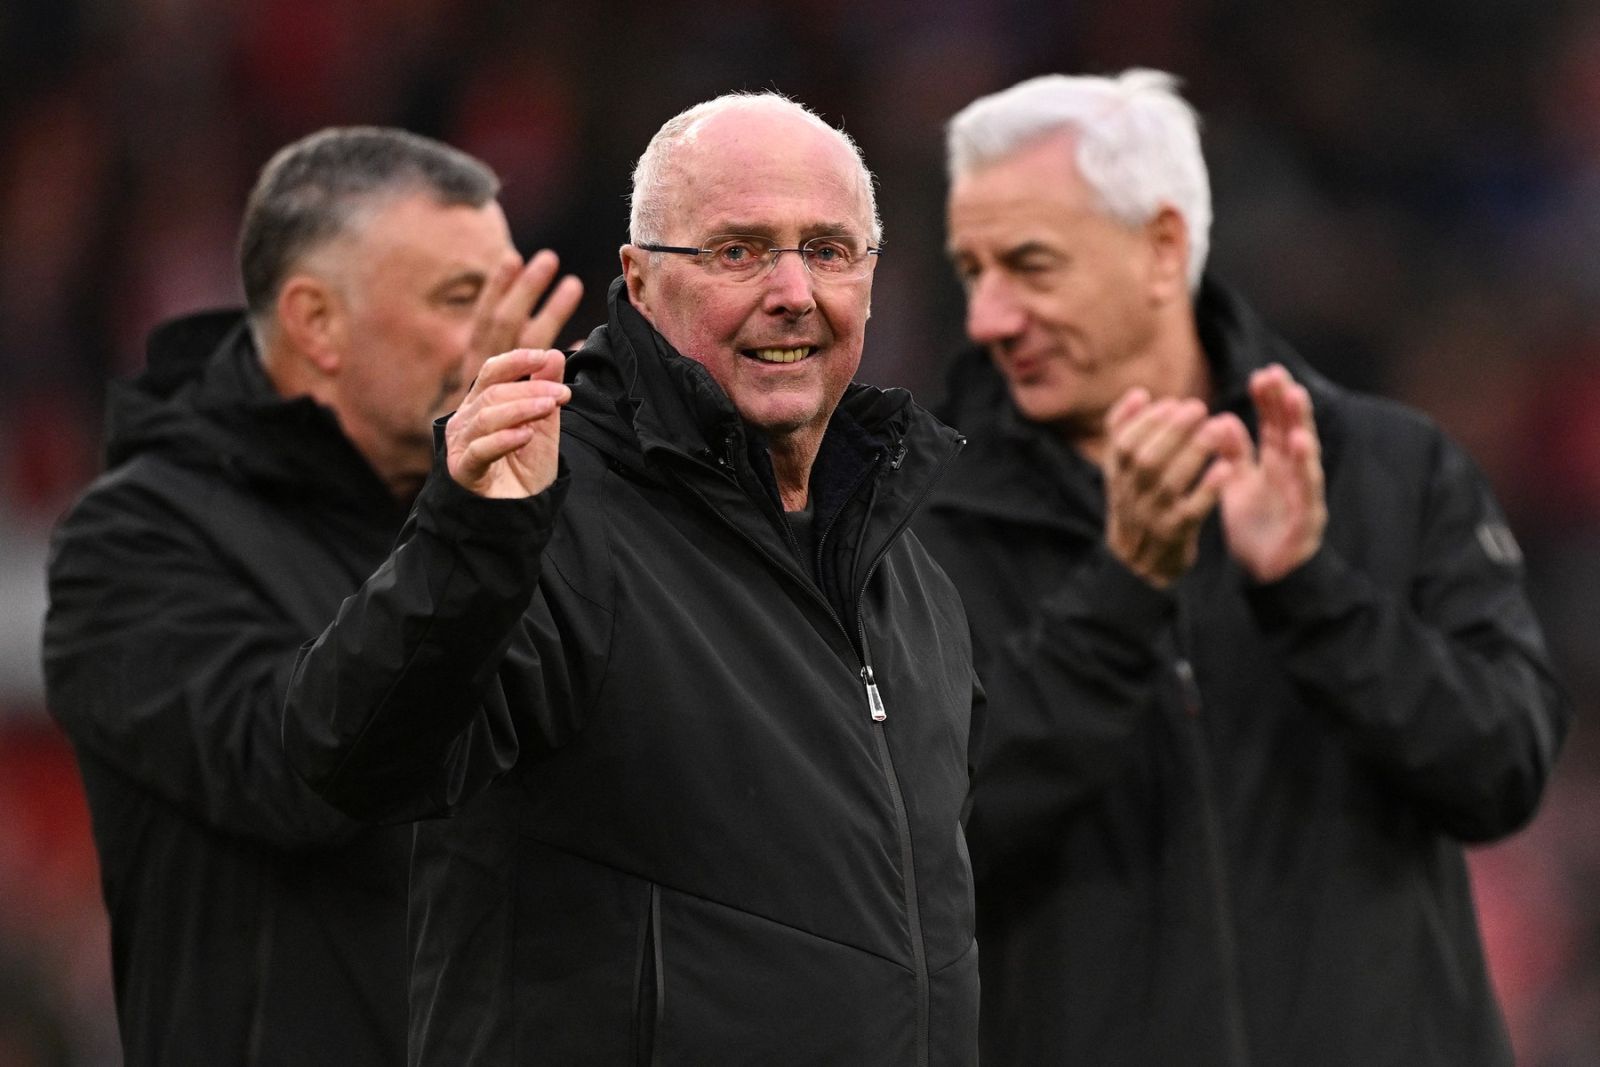 Liverpool Legends' manager John Aldridge (L), Liverpool Legends' manager Sven-Goran Eriksson (C) and Liverpool Legends' manager Ian Rush applaud the fans following the Legends football match between Liverpool Legends and Ajax Legends at Anfield in Liverpool, north-west England on March 23, 2024.,Image: 859035896, License: Rights-managed, Restrictions: , Model Release: no, Credit line: Oli SCARFF / AFP / Profimedia